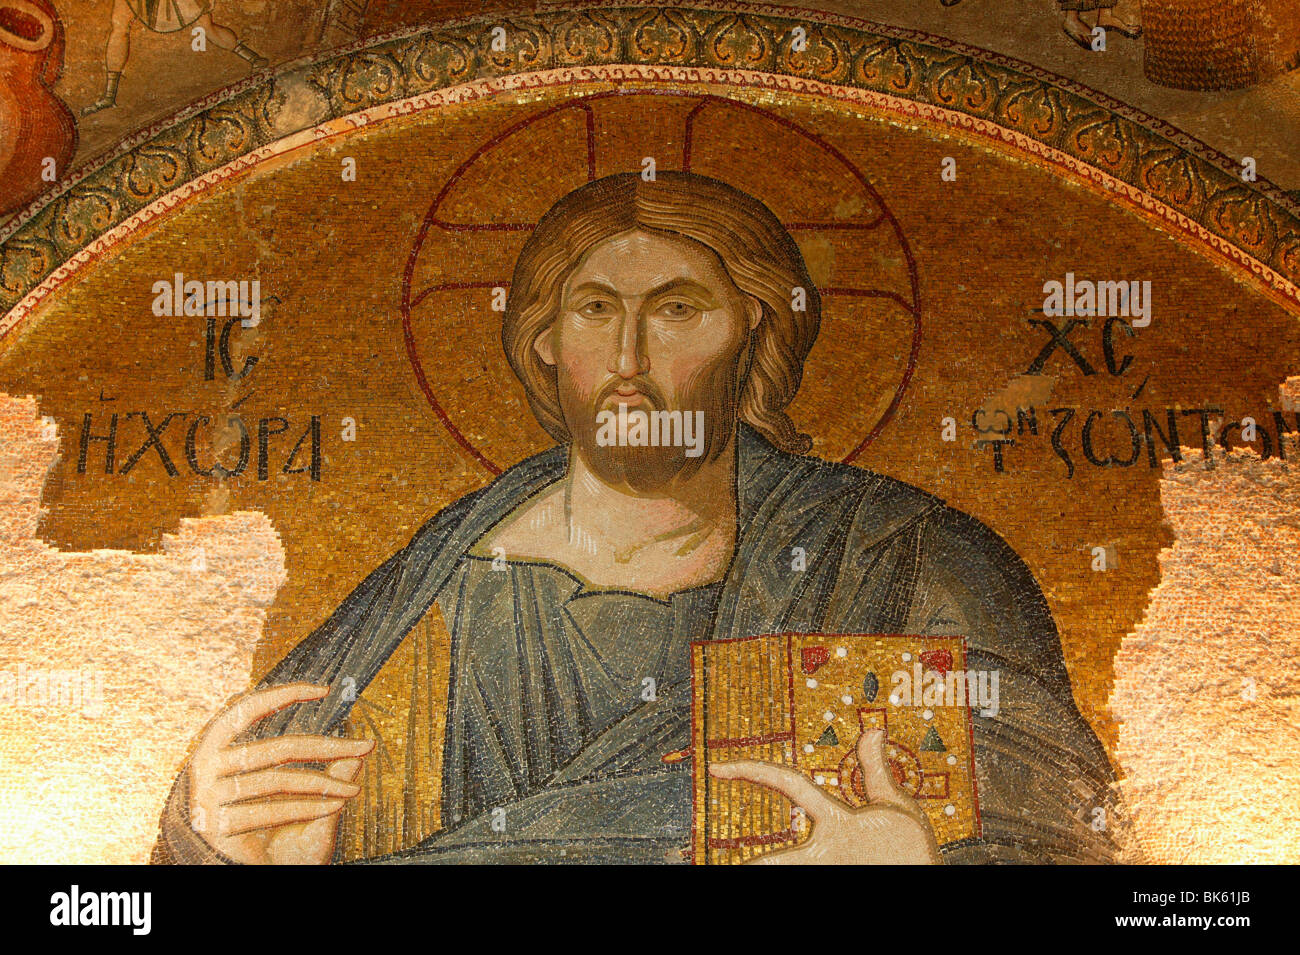 Roof mosaic of Christ the Pantocrator, Church of St. Saviour in Chora, Istanbul, Turkey, Europe Stock Photo